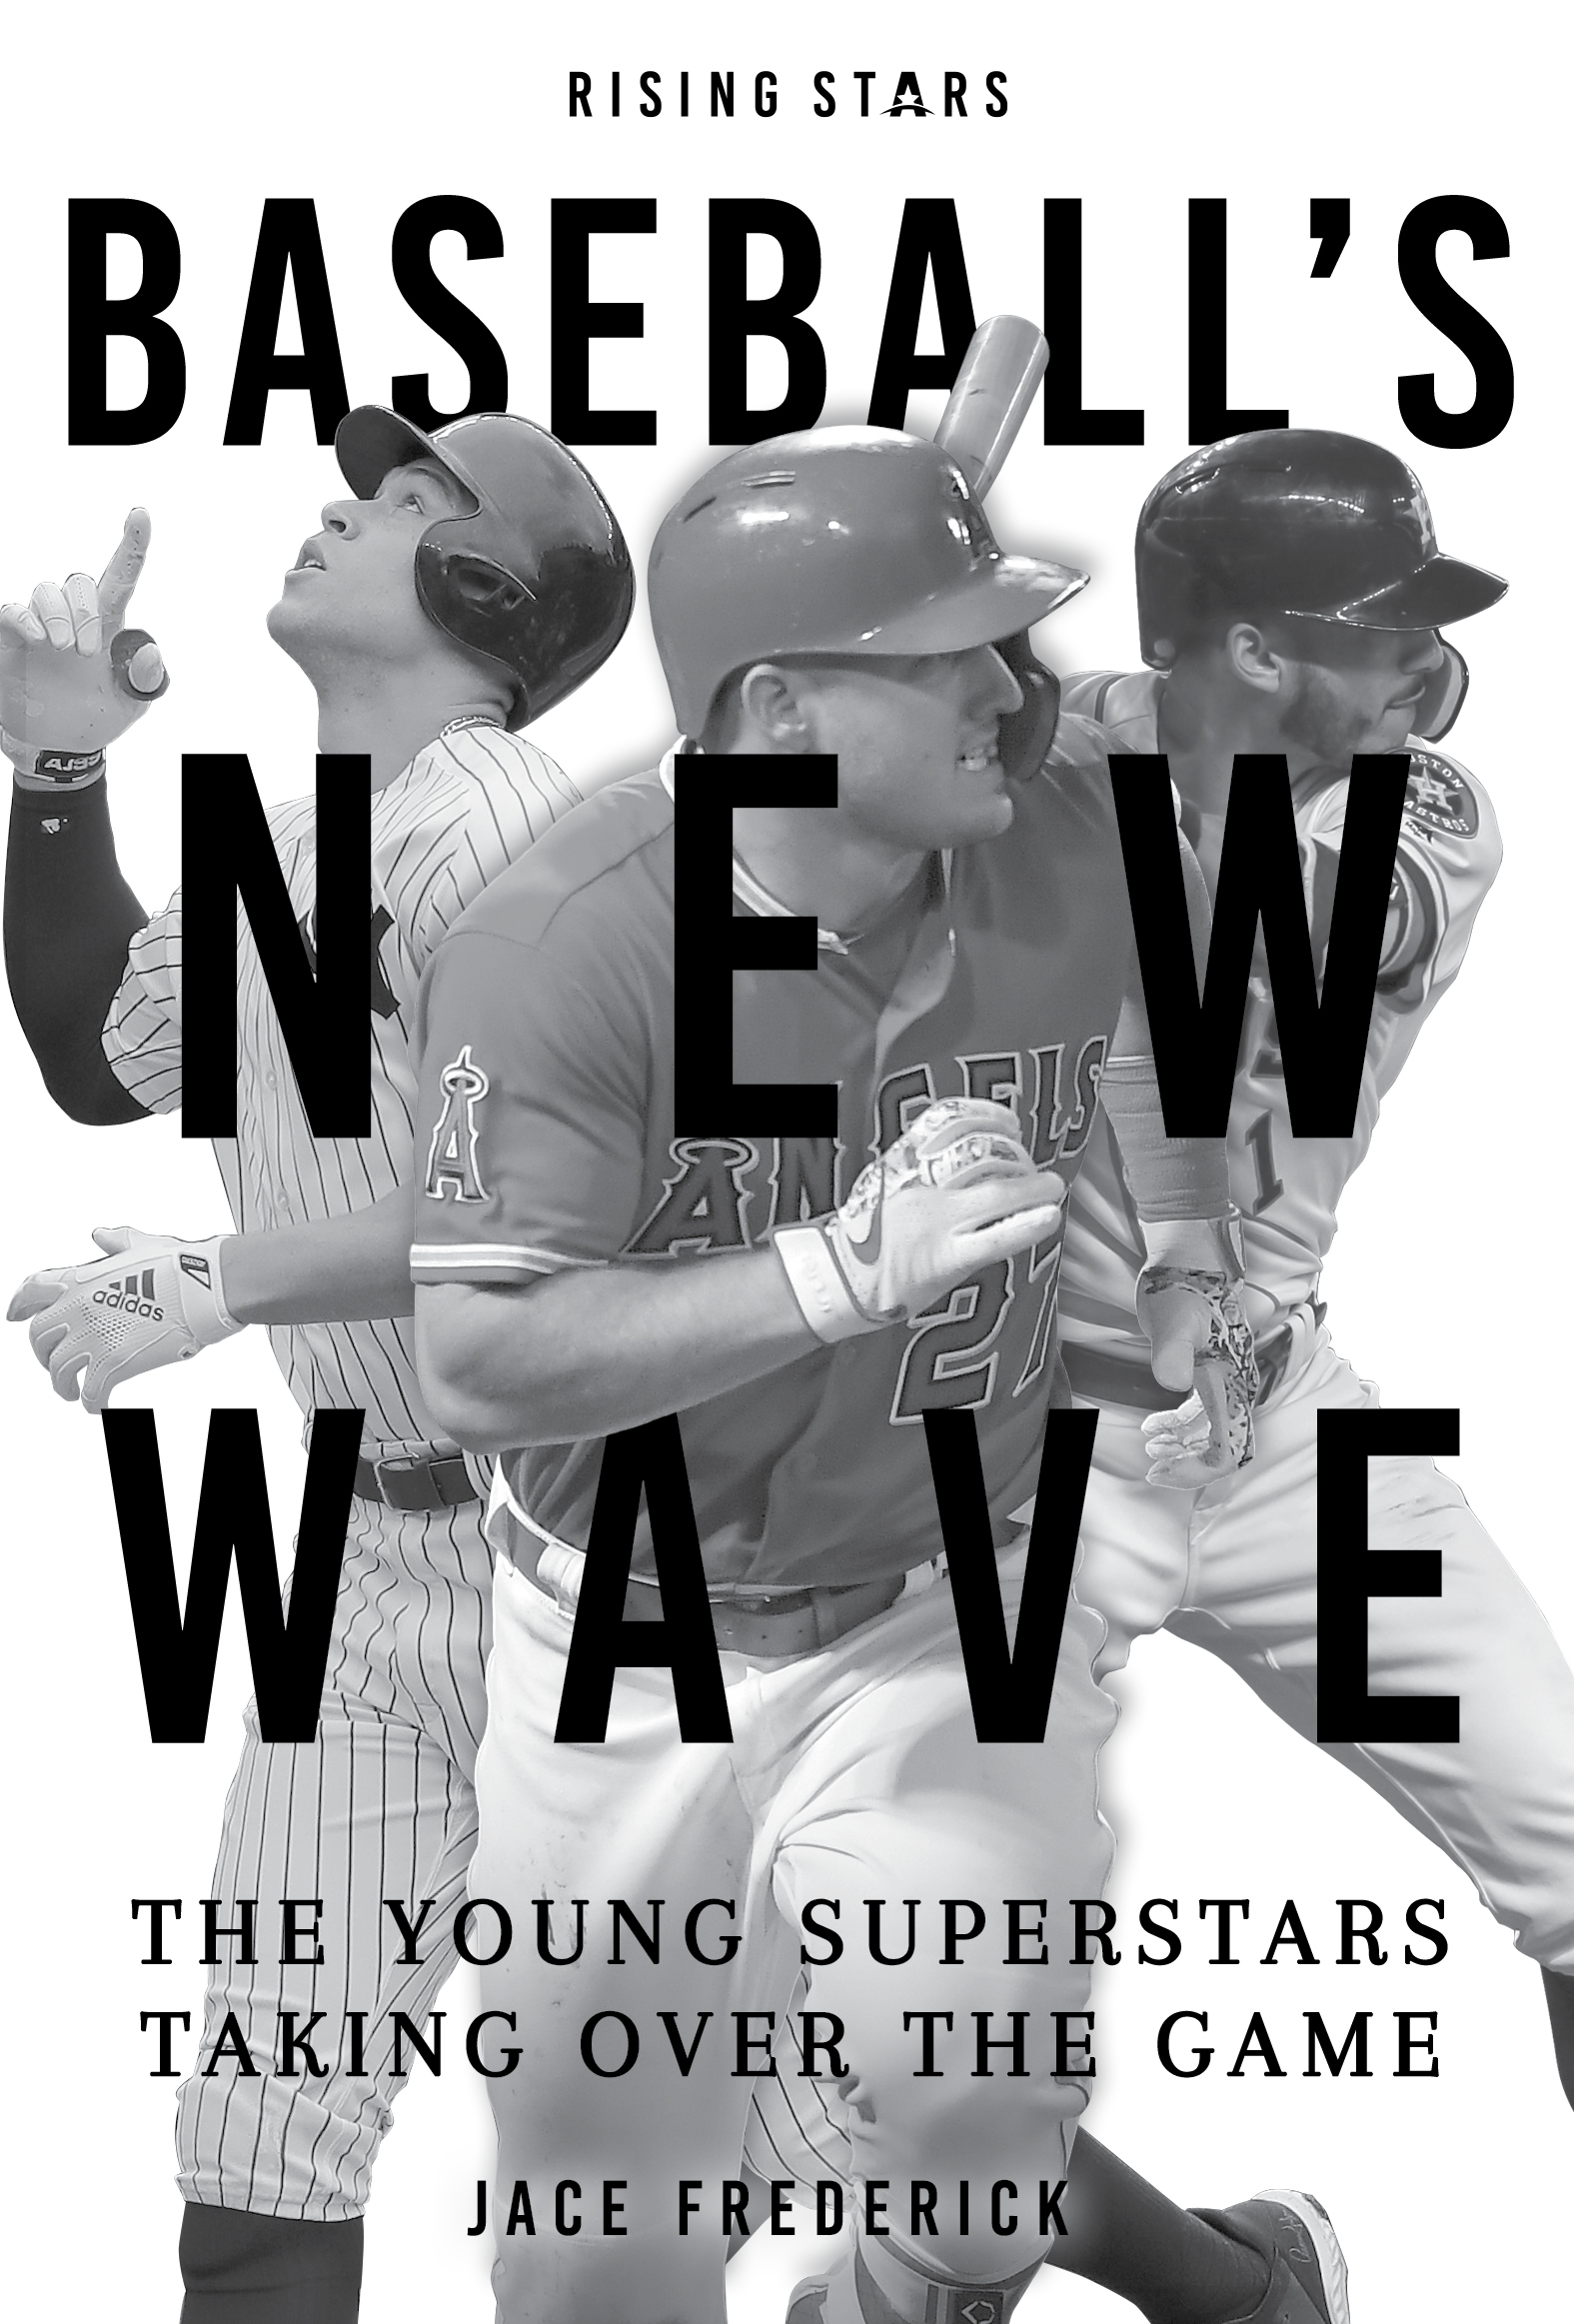 Baseballs New Wave The Young Superstars Taking Over the Game 2019 by Press - photo 2